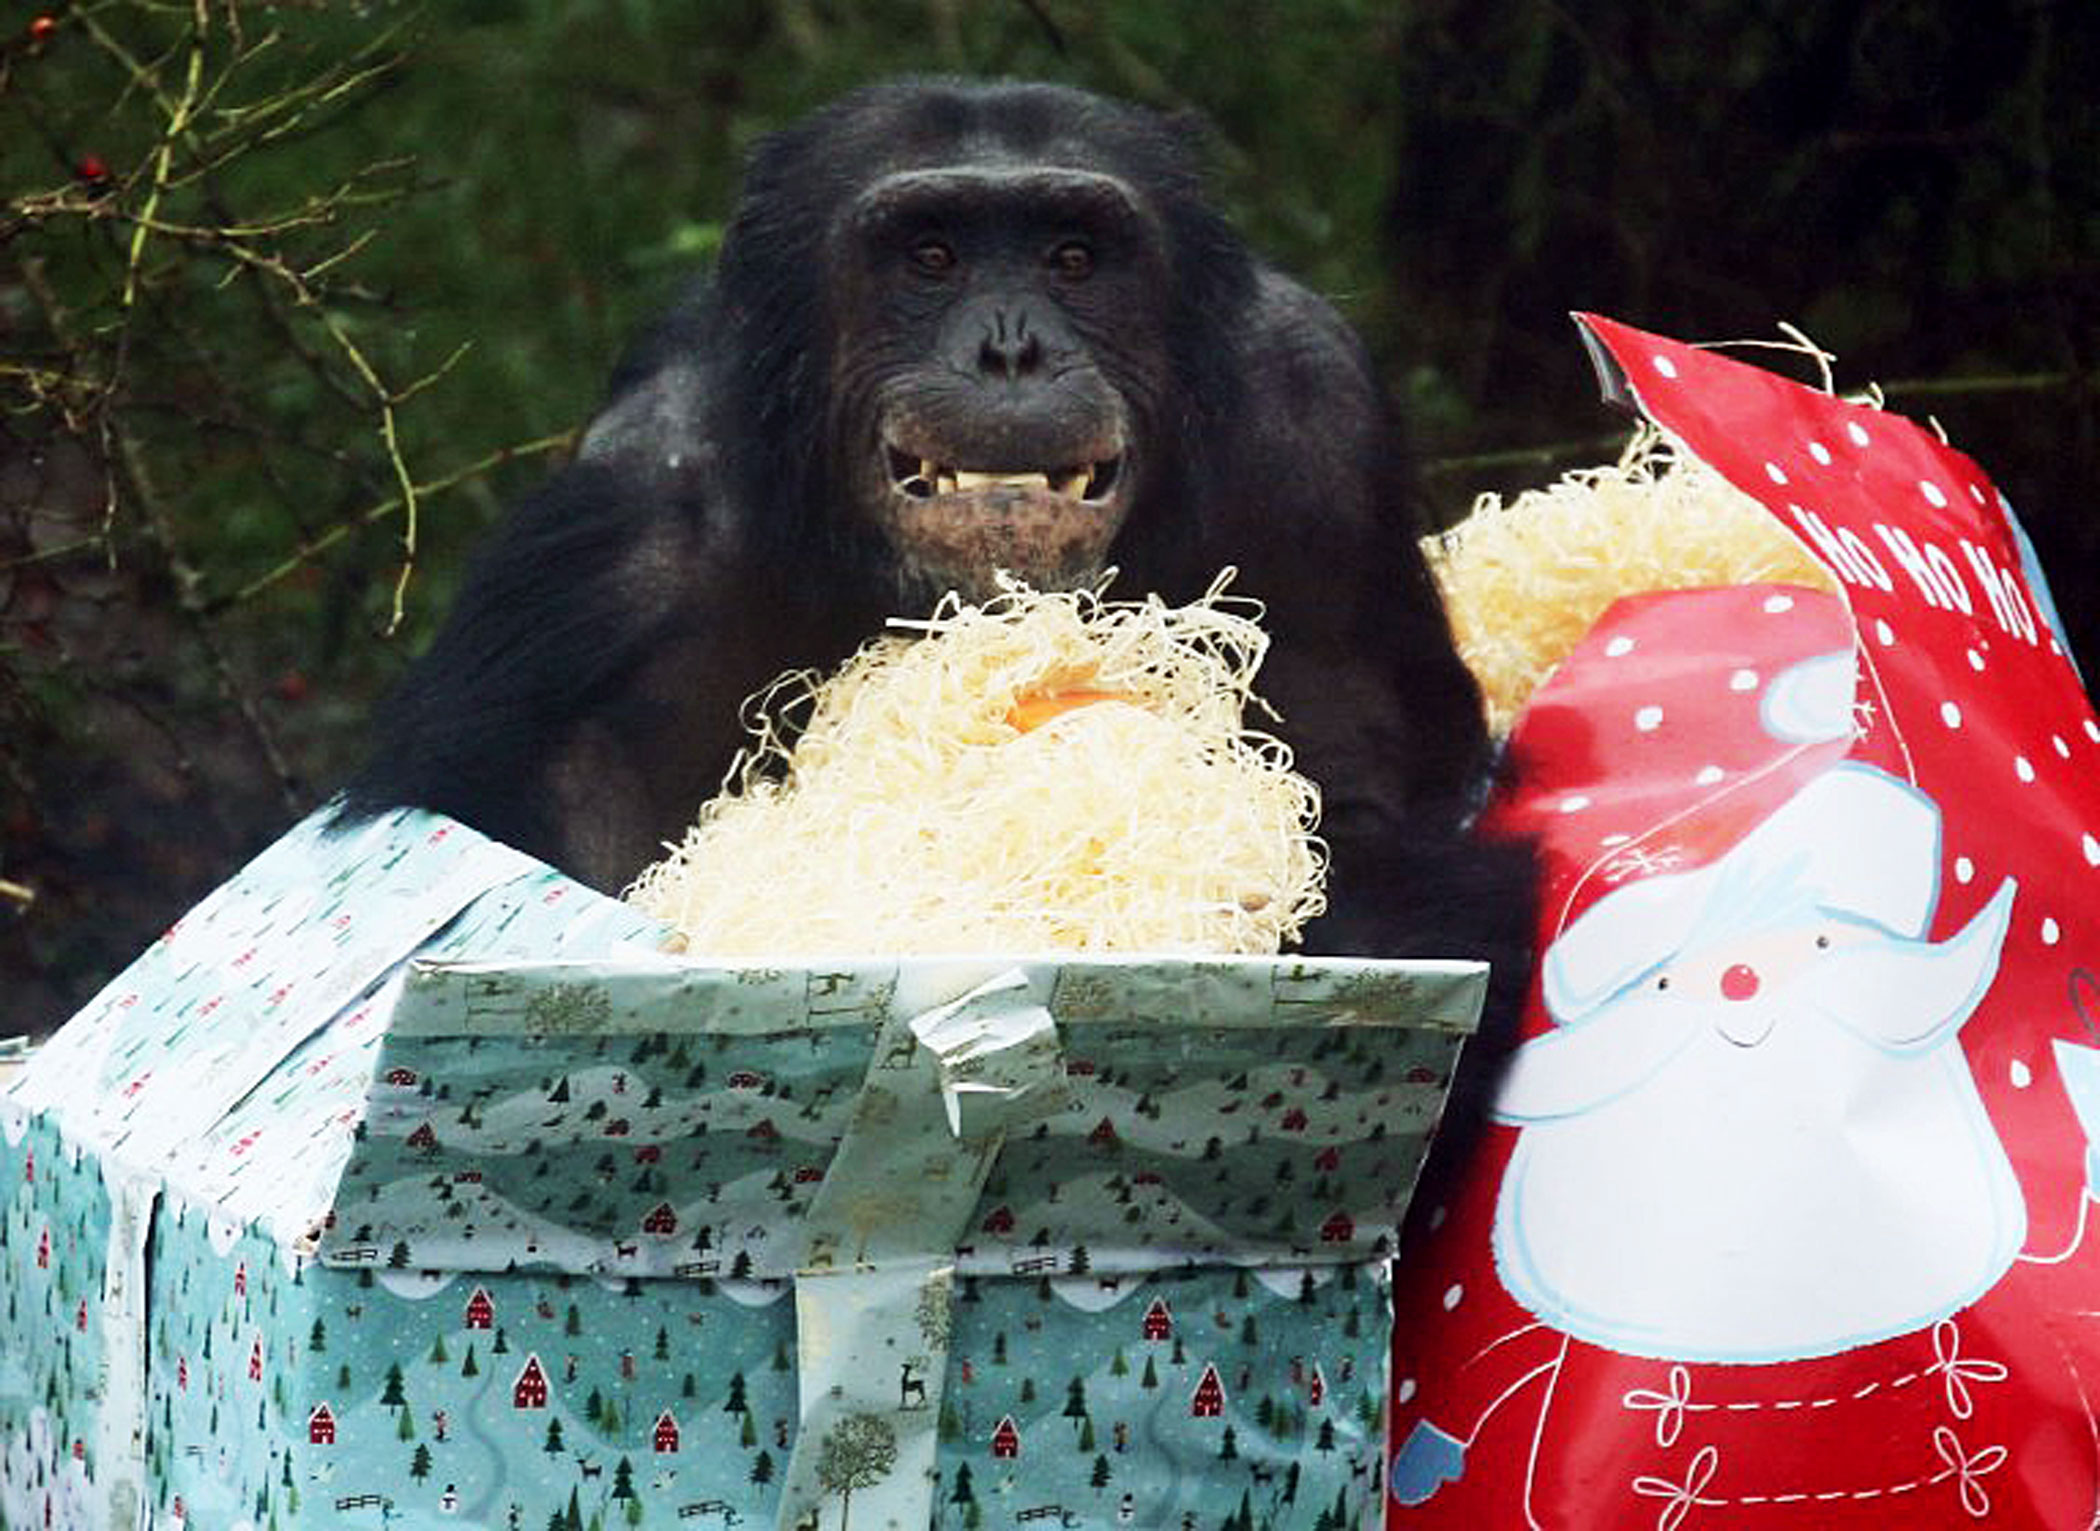 A chimpanzee at ZSL Whipsnade Zoo unwraps Christmas gifts stuffed with snacks.